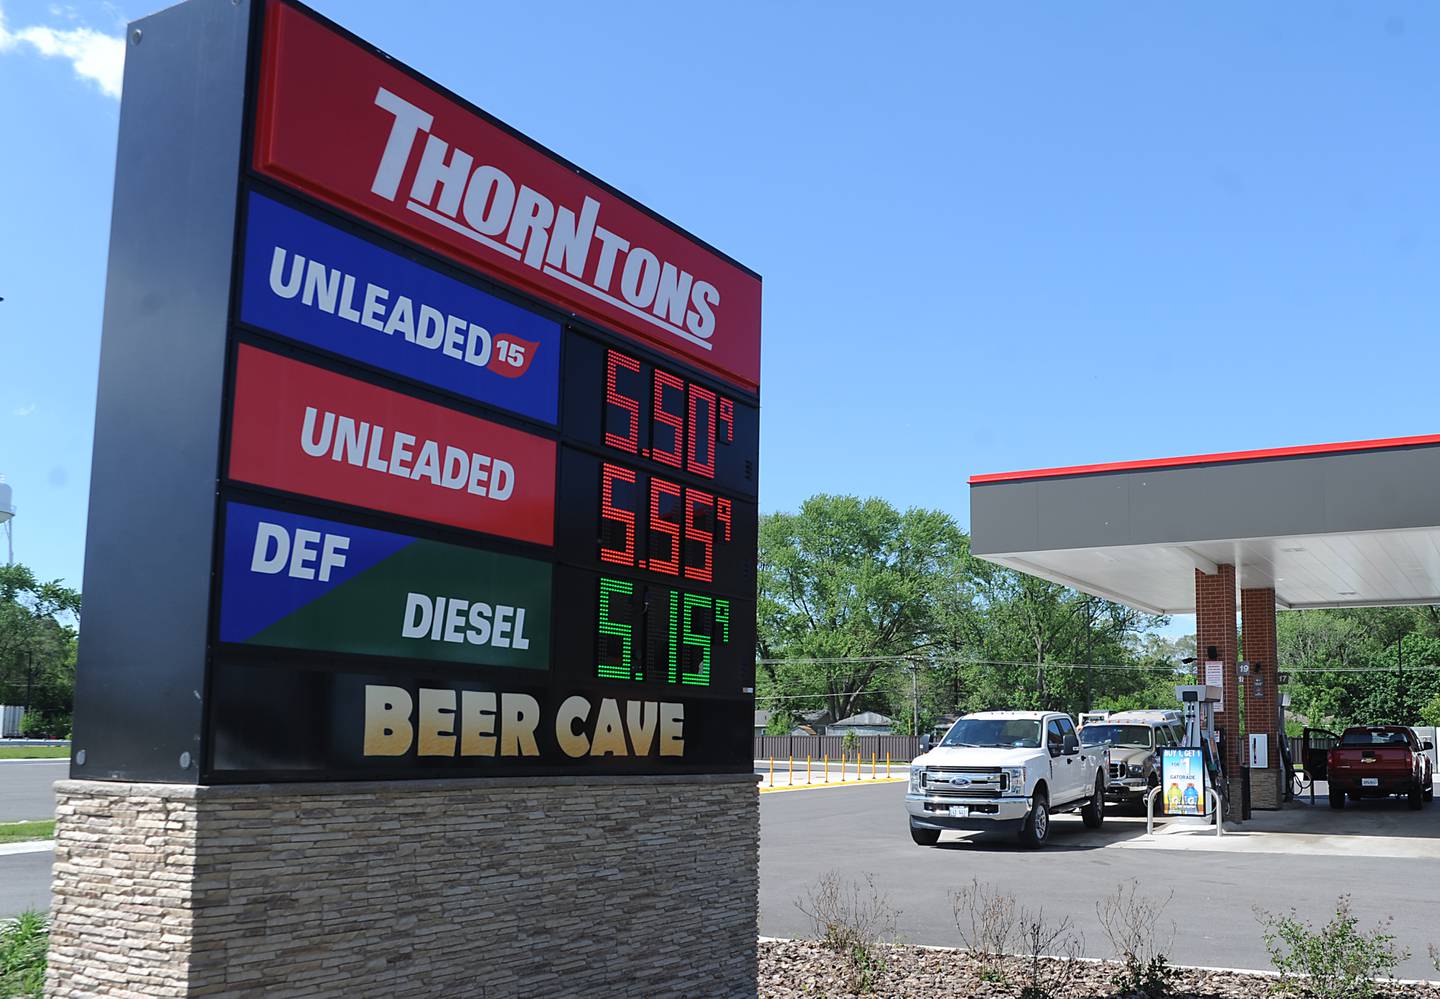 Fuel prices on Thursday, June 2, 2022, at the Thorntons gas station at the intersection of Chapel Hill Road and Route 120 in McHenry. Fuel prices reached a new high this week.